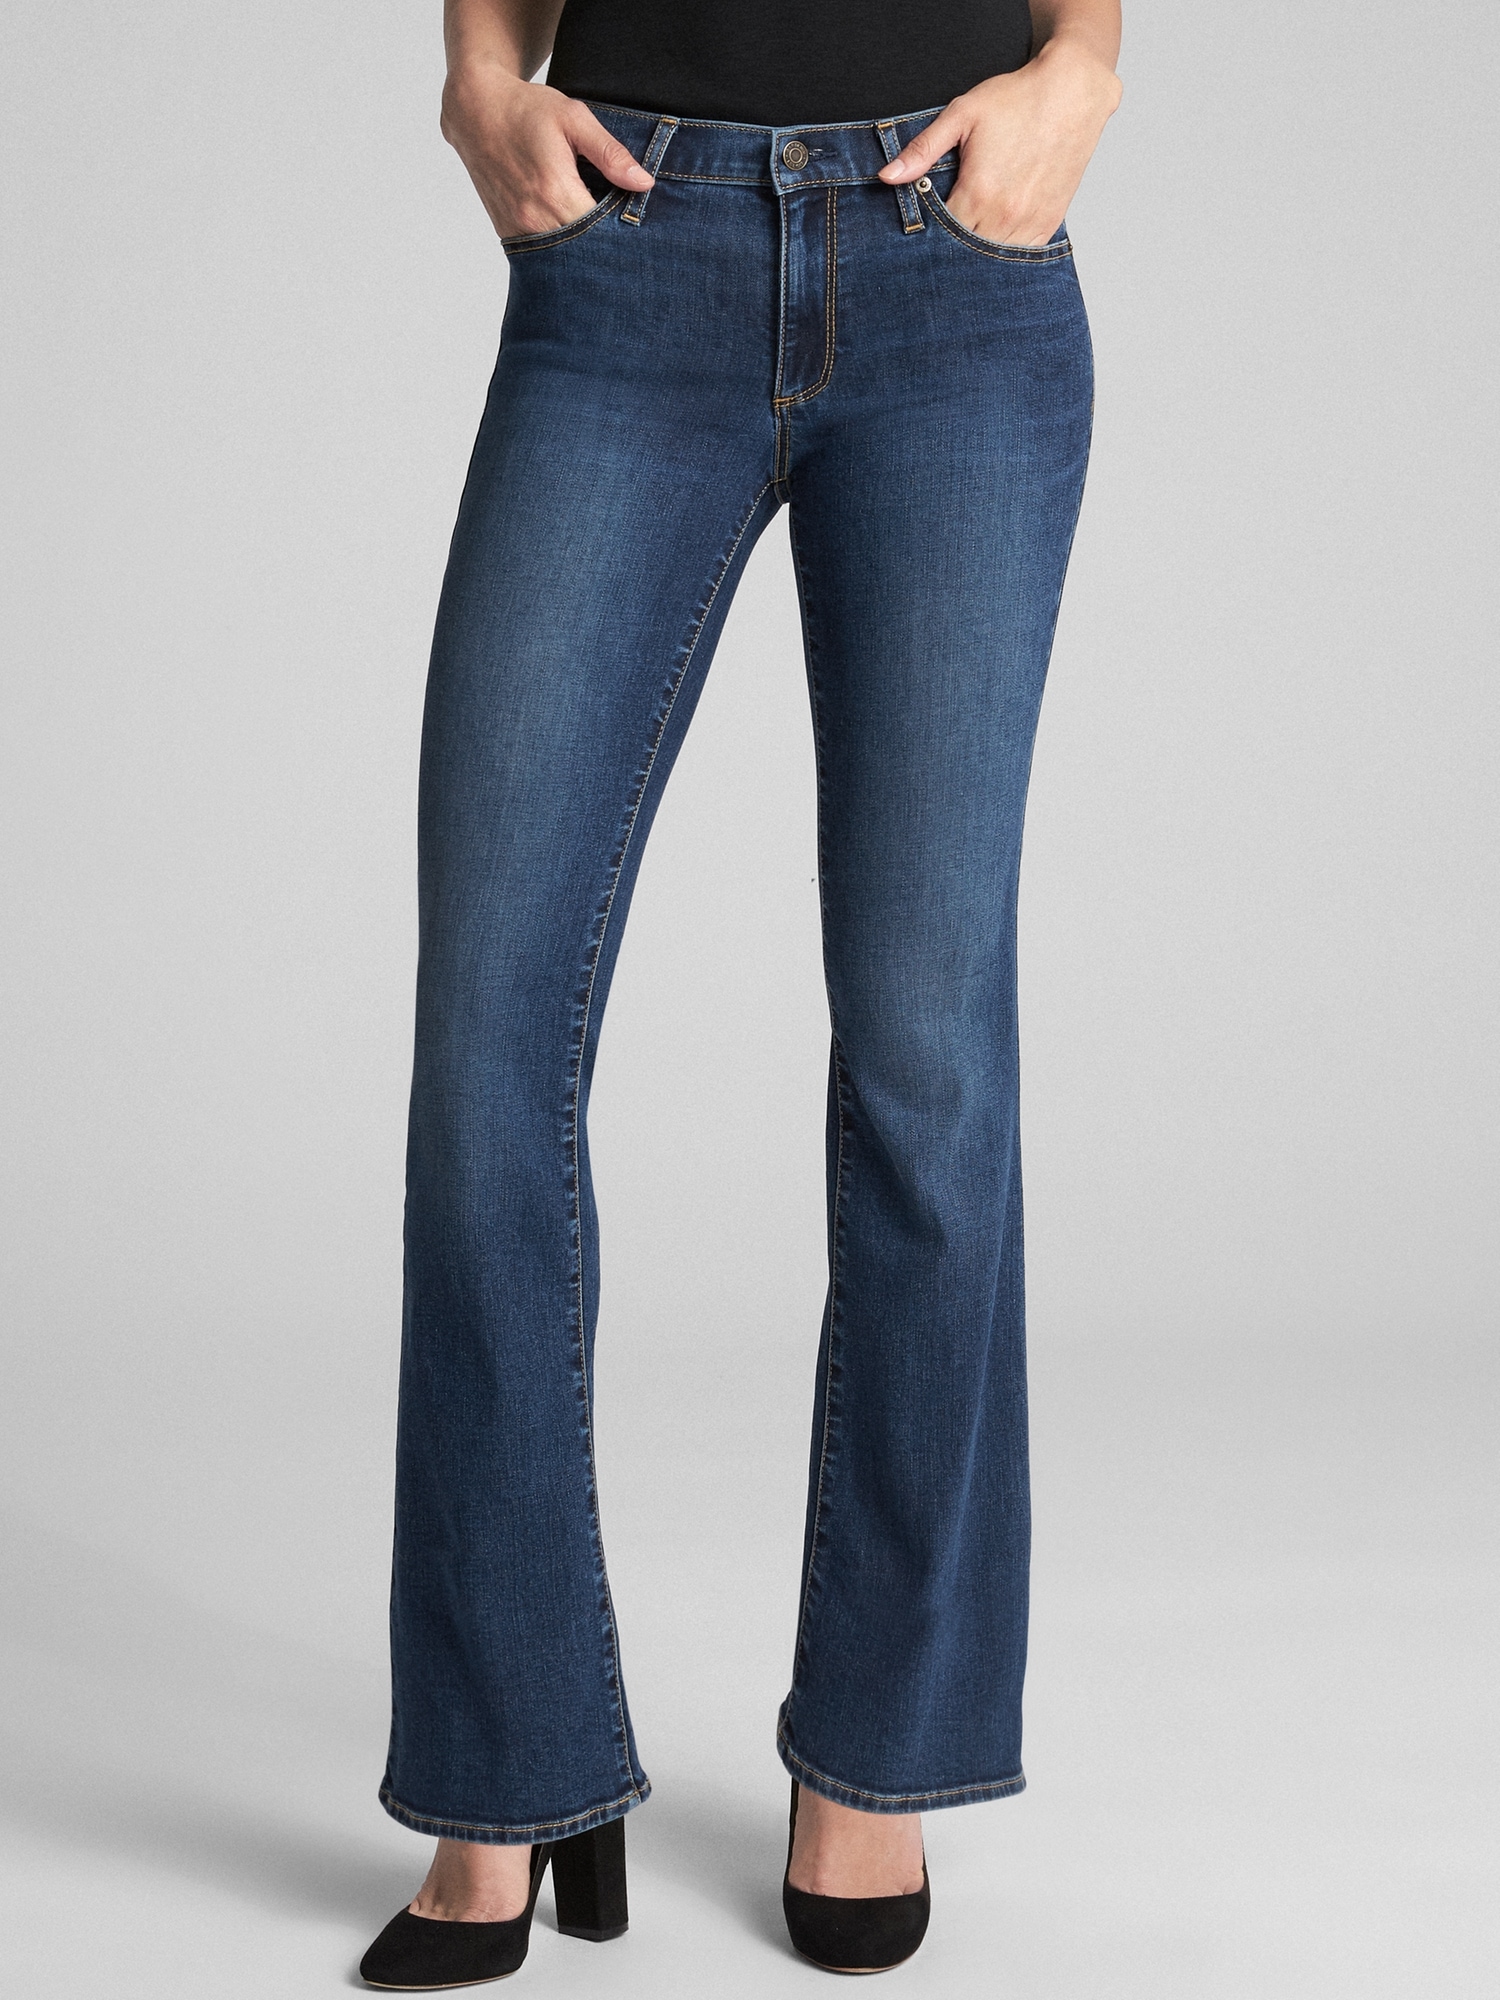 camilla and marc margot jeans